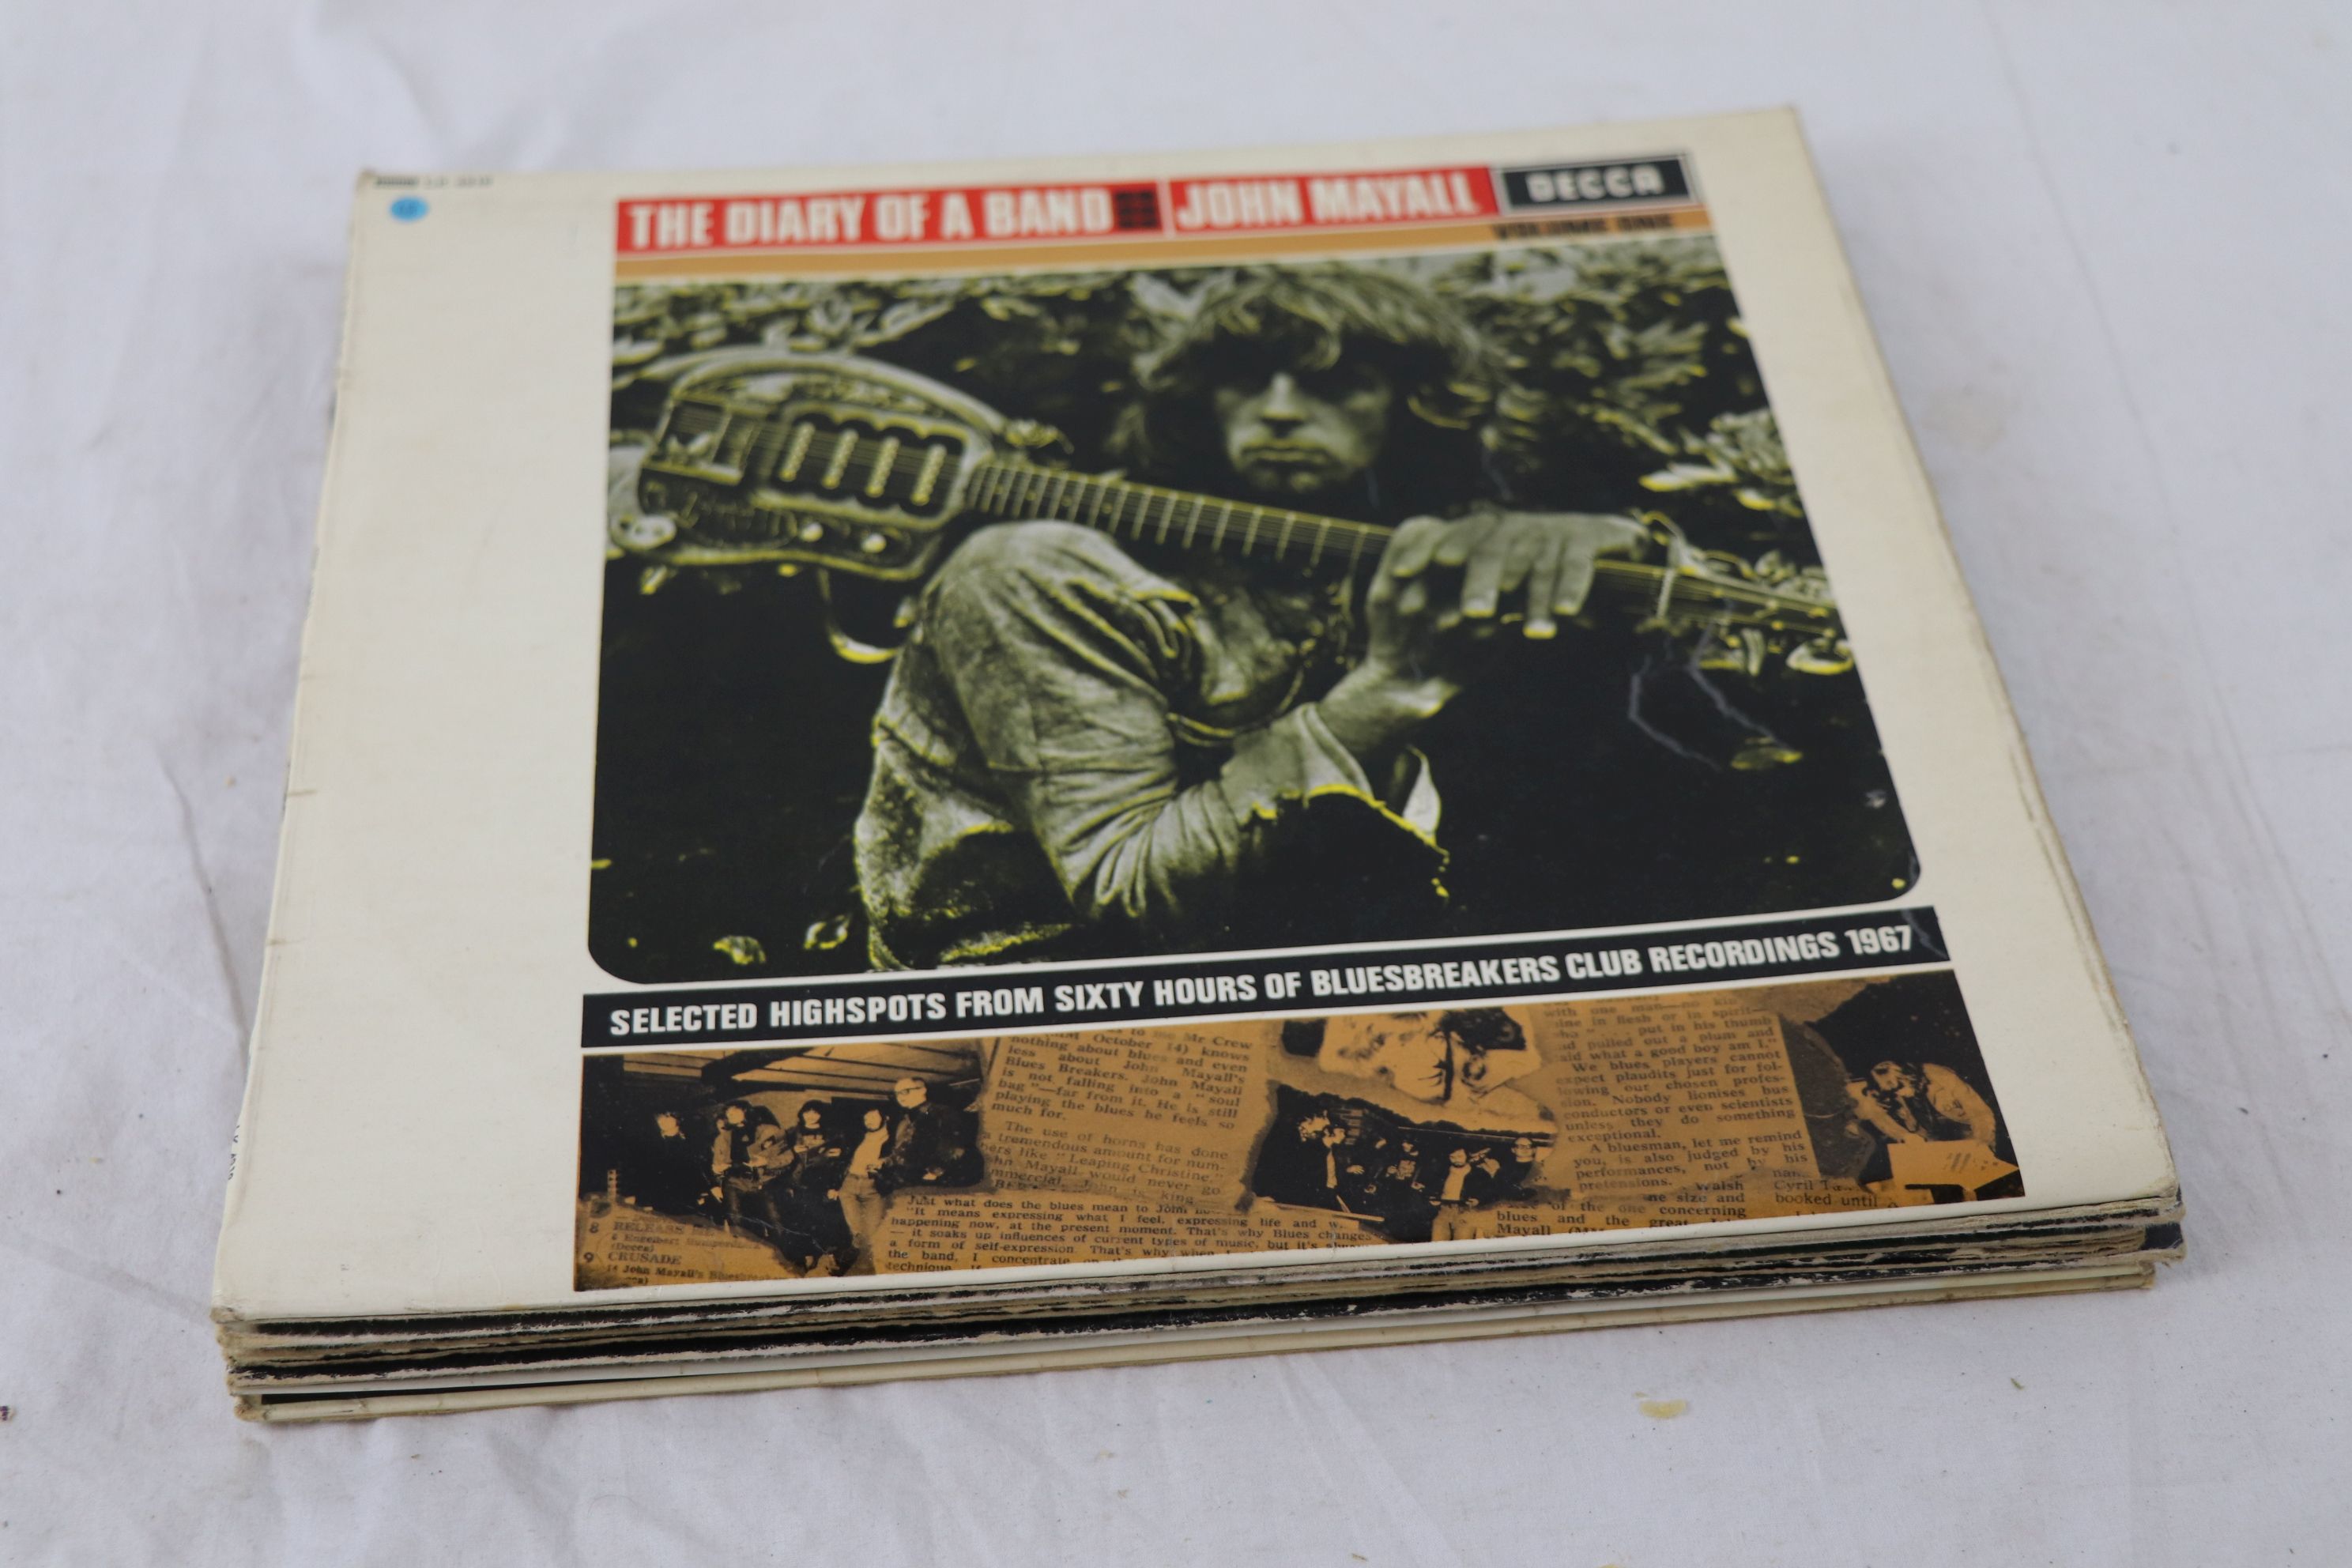 Vinyl - Collection of 6 John Mayall to include Diary of a Band vol I, Beyond the Turning Point,